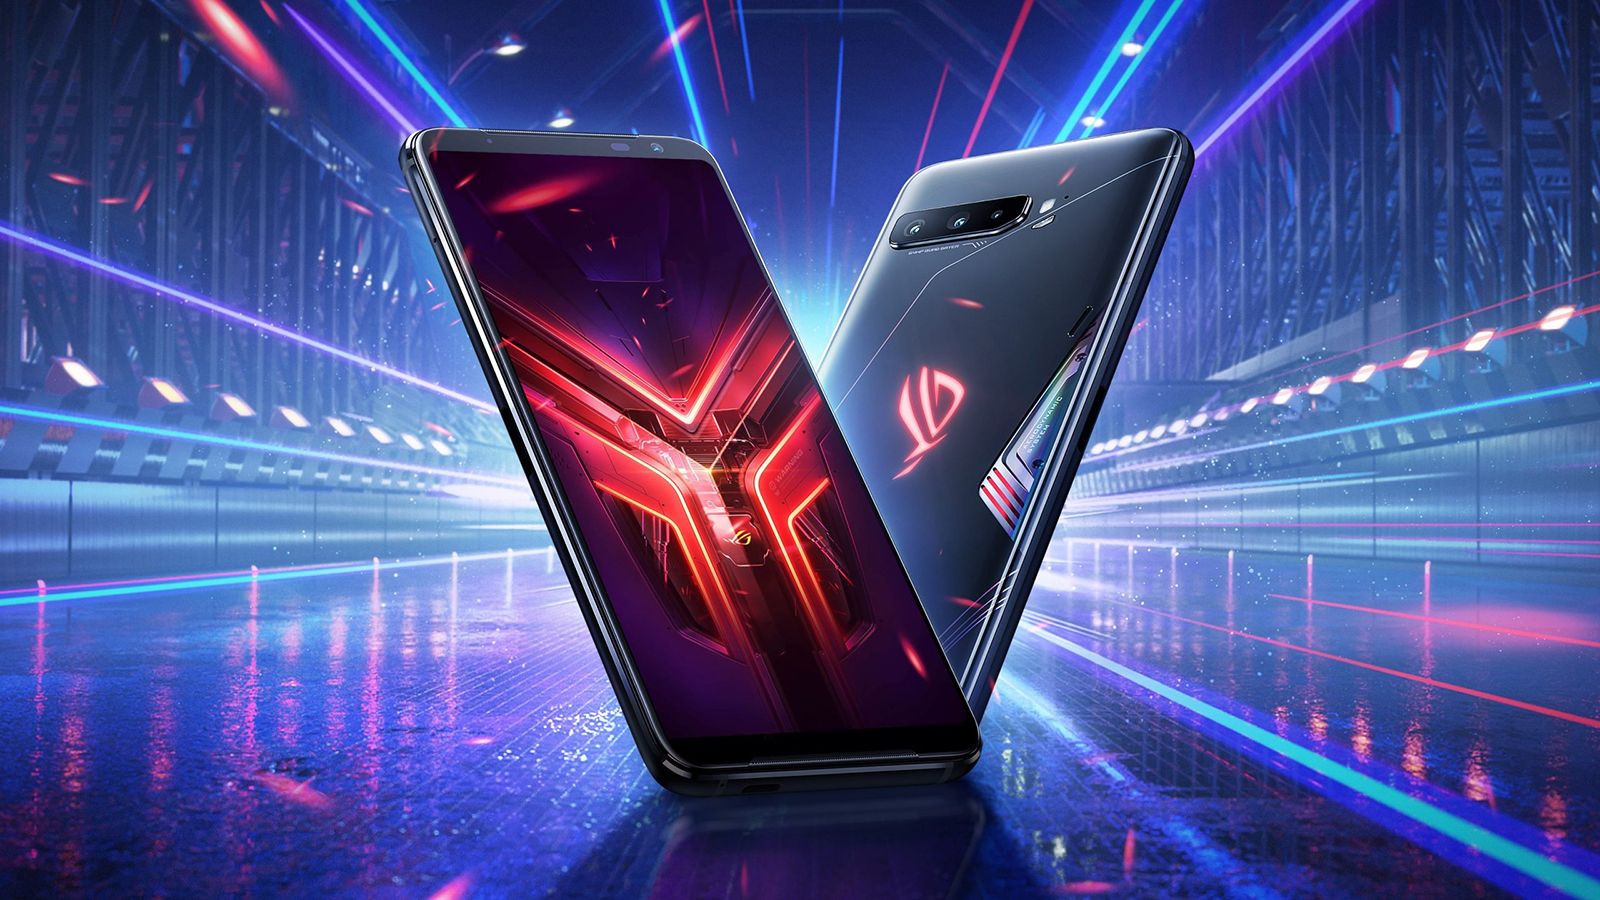 Asus ROG Phone 5 gets shown off from all angles in new regulatory